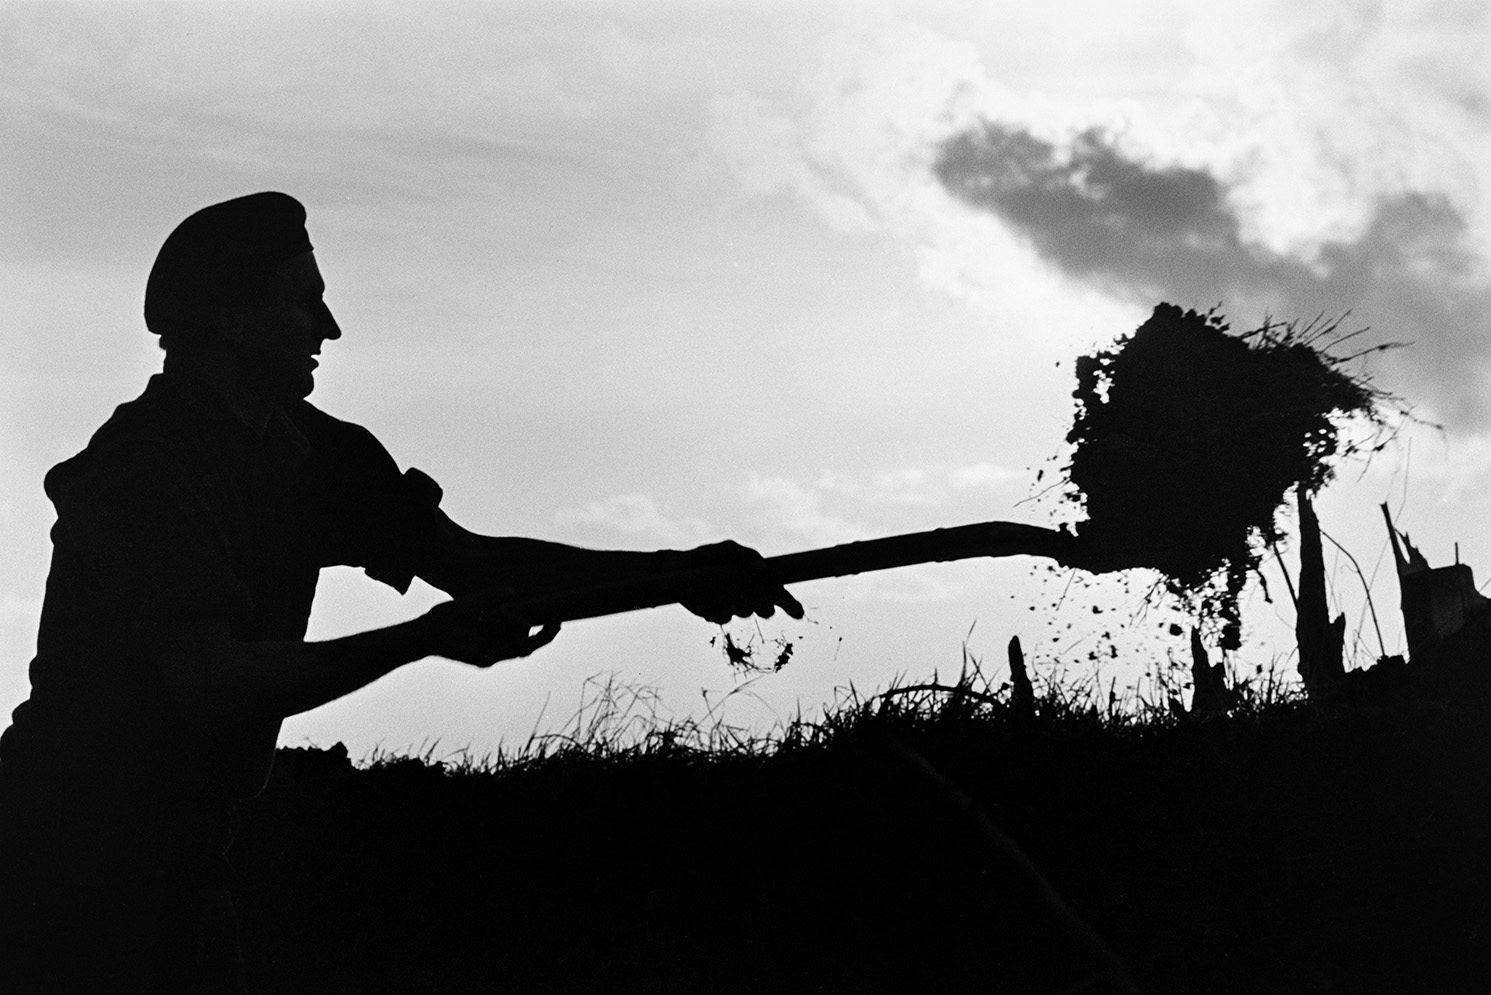 Ivor Bourne clatting a hedge at Mill Road Farm, Beaford using a fork. He is building up hedge bank with turf and is silhouetted against the horizon. The farm was also known as Jeffrys.